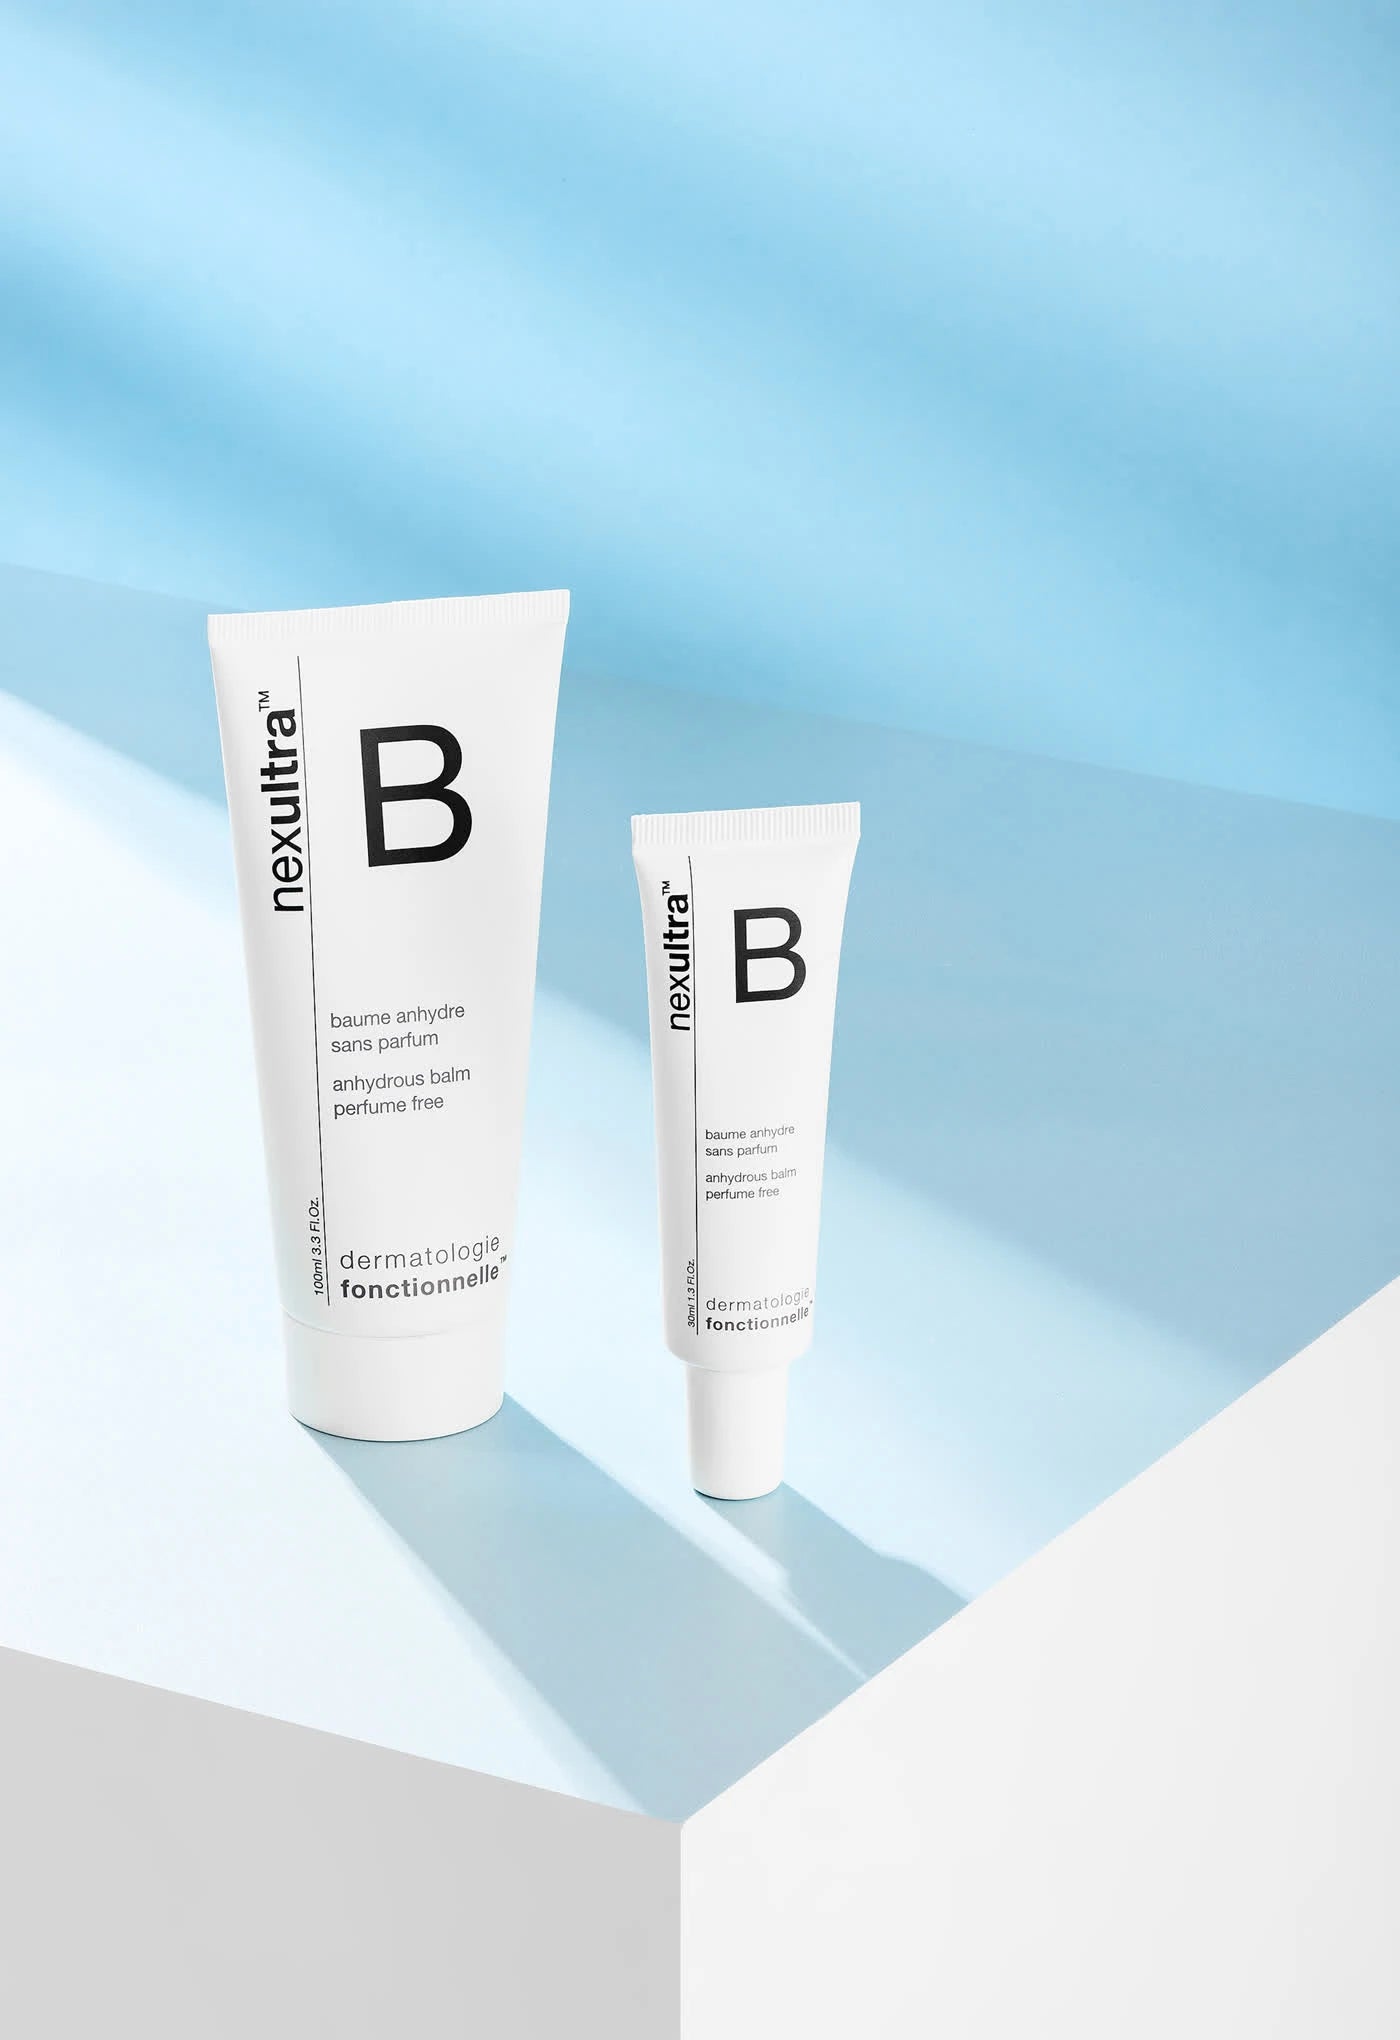 Nexultra B - Multi-action soothing balm